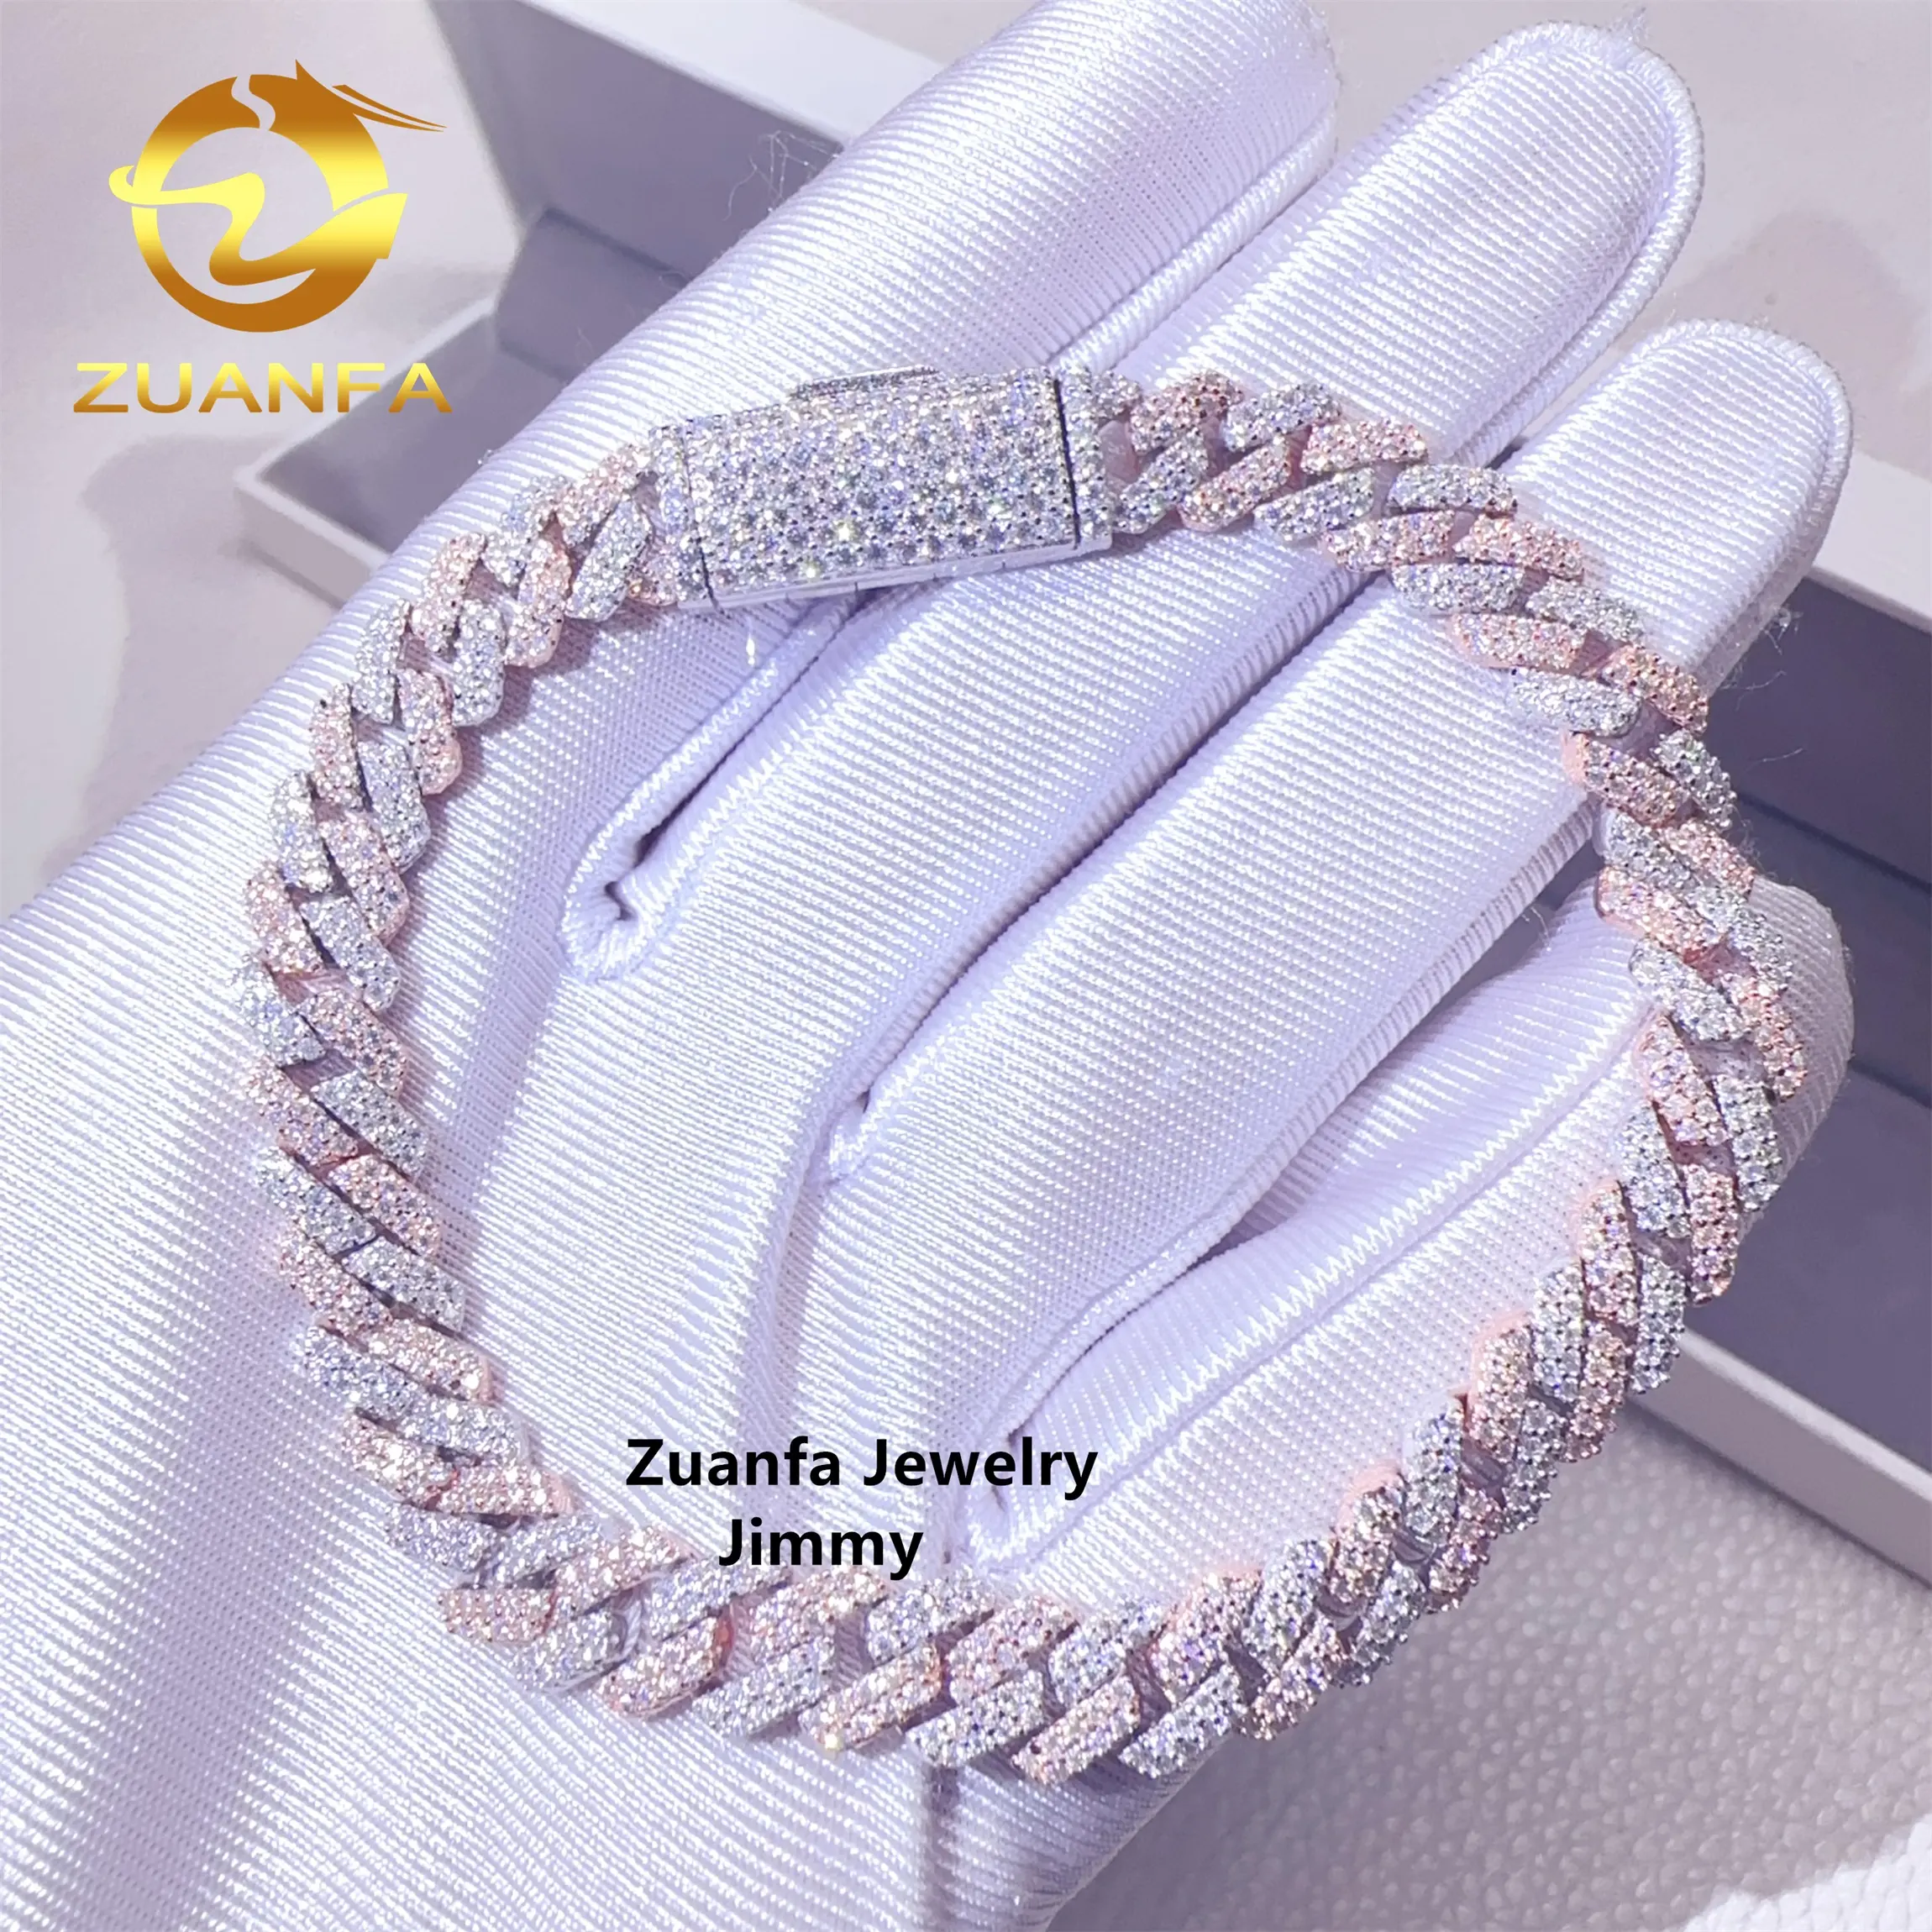 Two Tone Color 8mm 2 Rows 925 Solid Silver Iced Out Hip Hop Jewelry VVS1 Moissanite Diamond Cuban Link Chain Bracelet Men